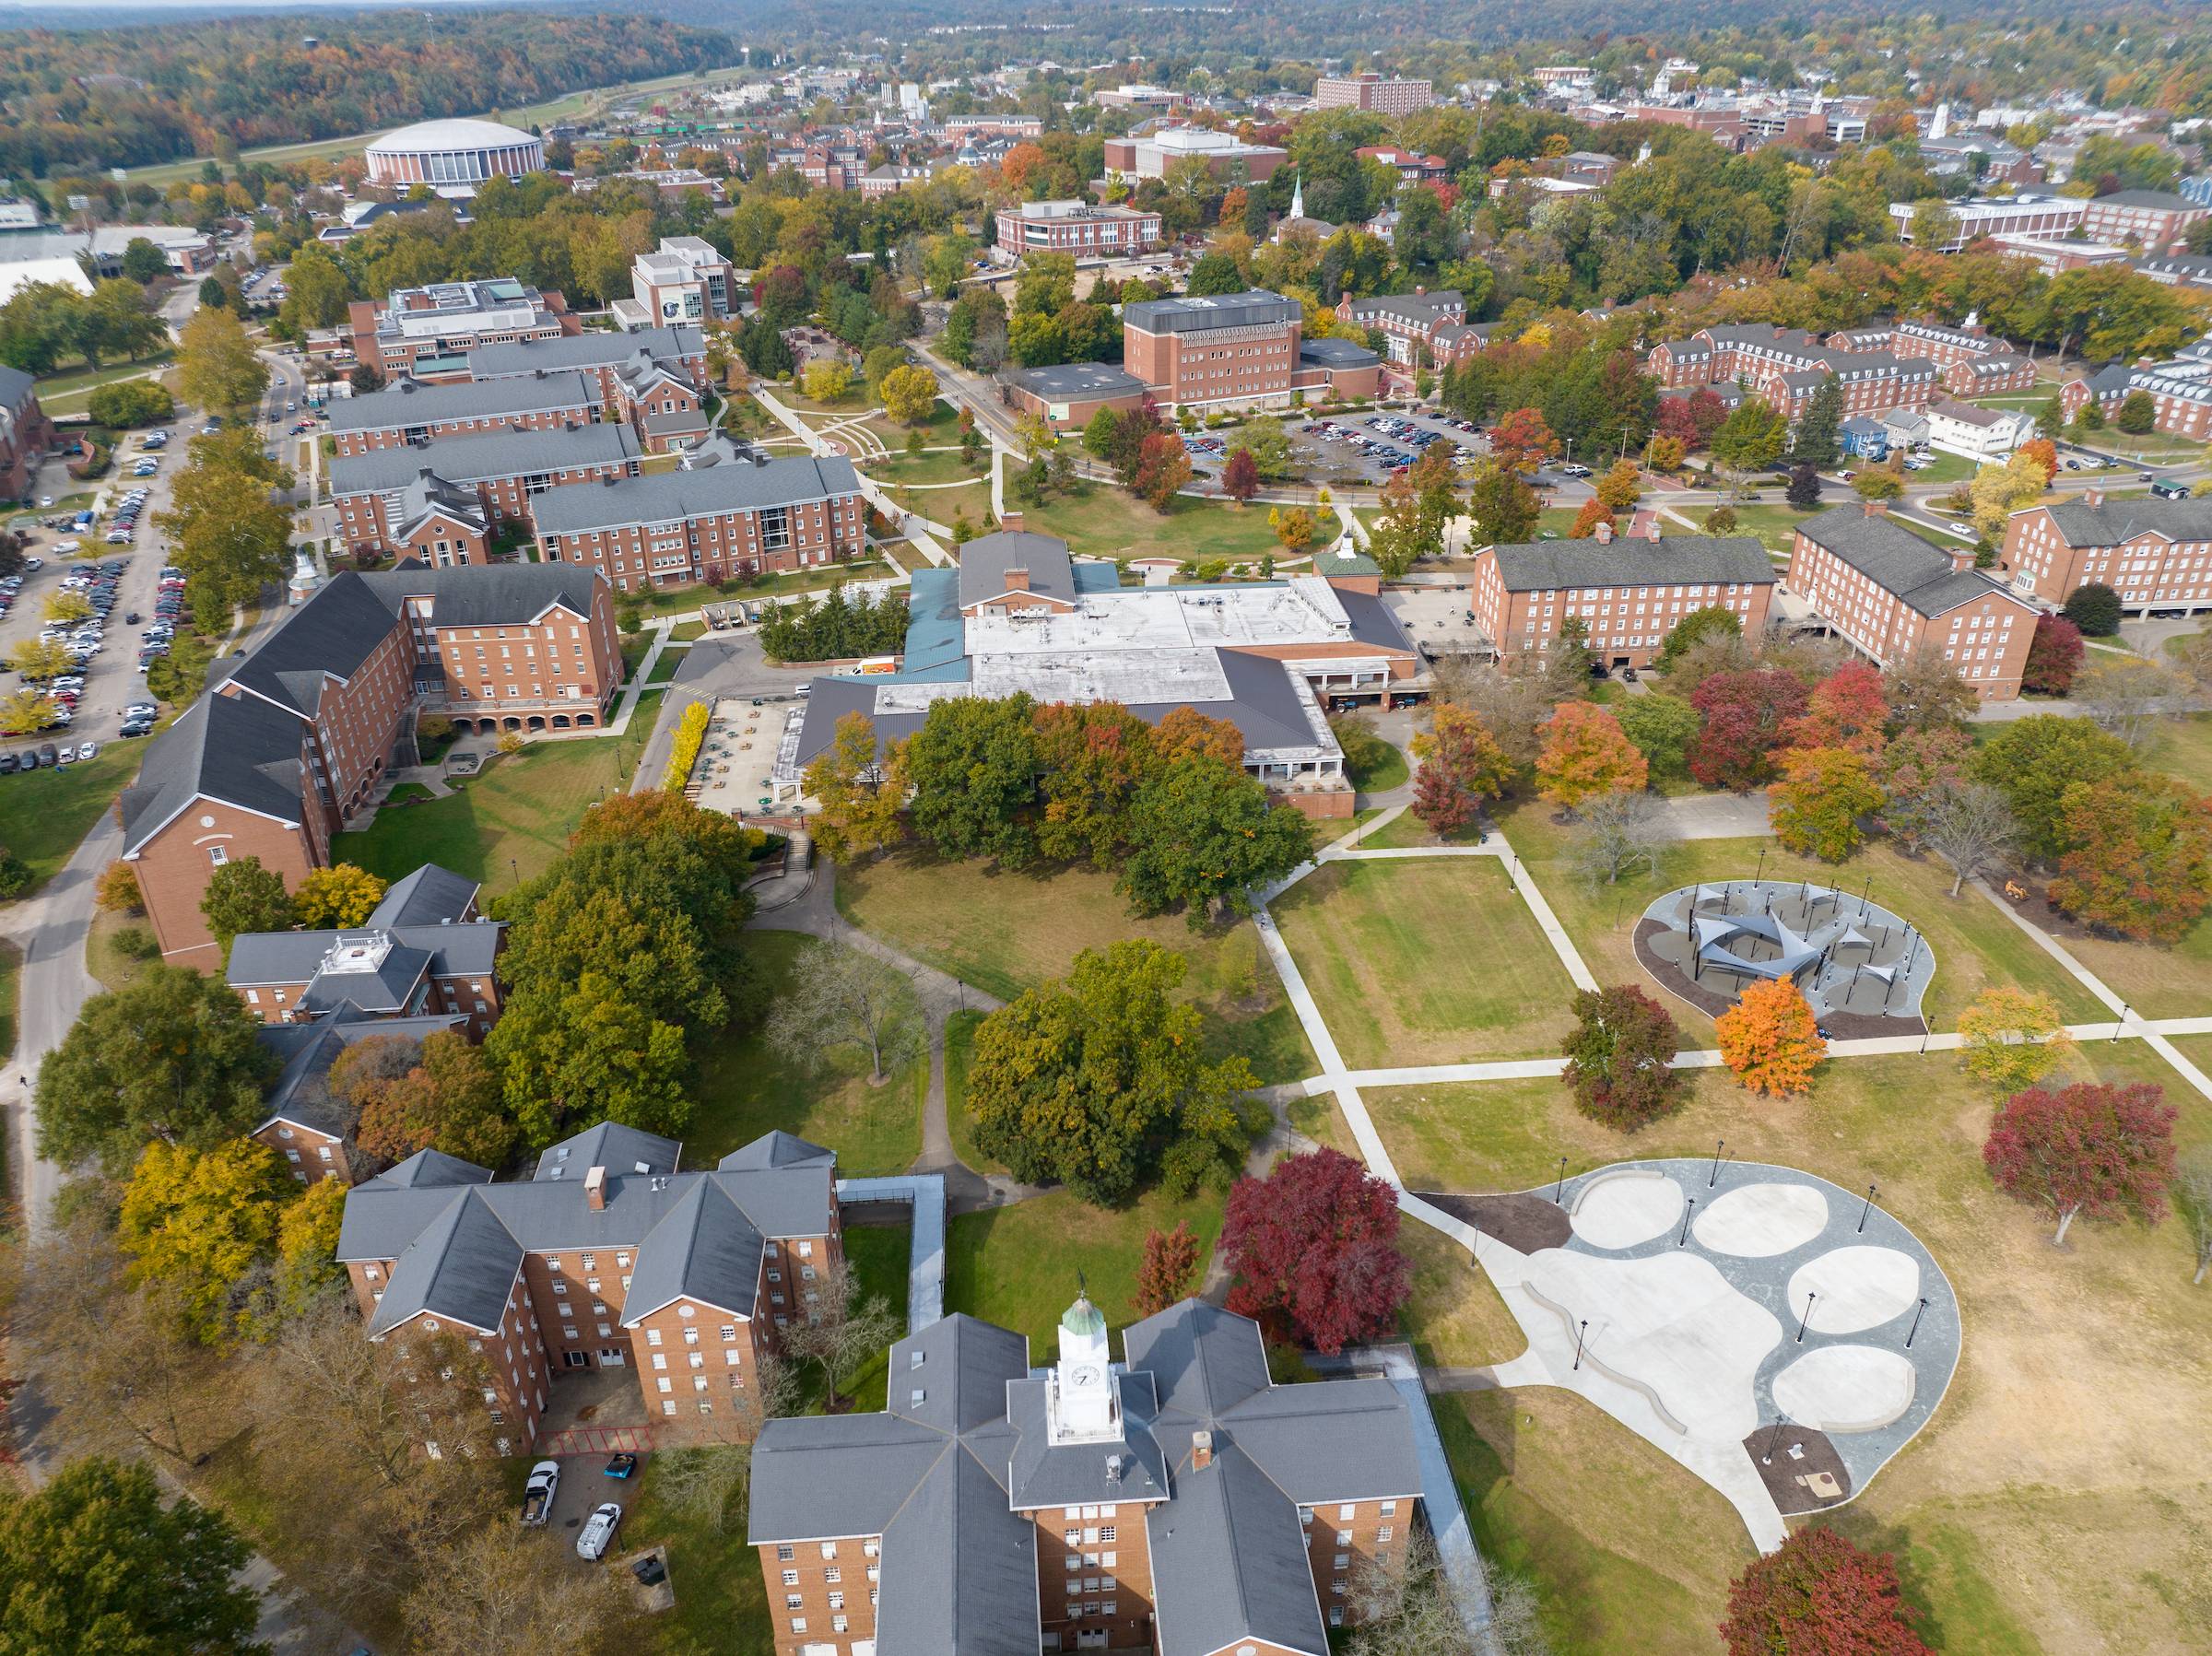 For the fourth consecutive year, Ohio University was named the best-value public university in the state of Ohio by U.S. News and World Report, cementing its position among the nation's top institutions. The University also earned accolades for its academic excellence and commitment to student success.